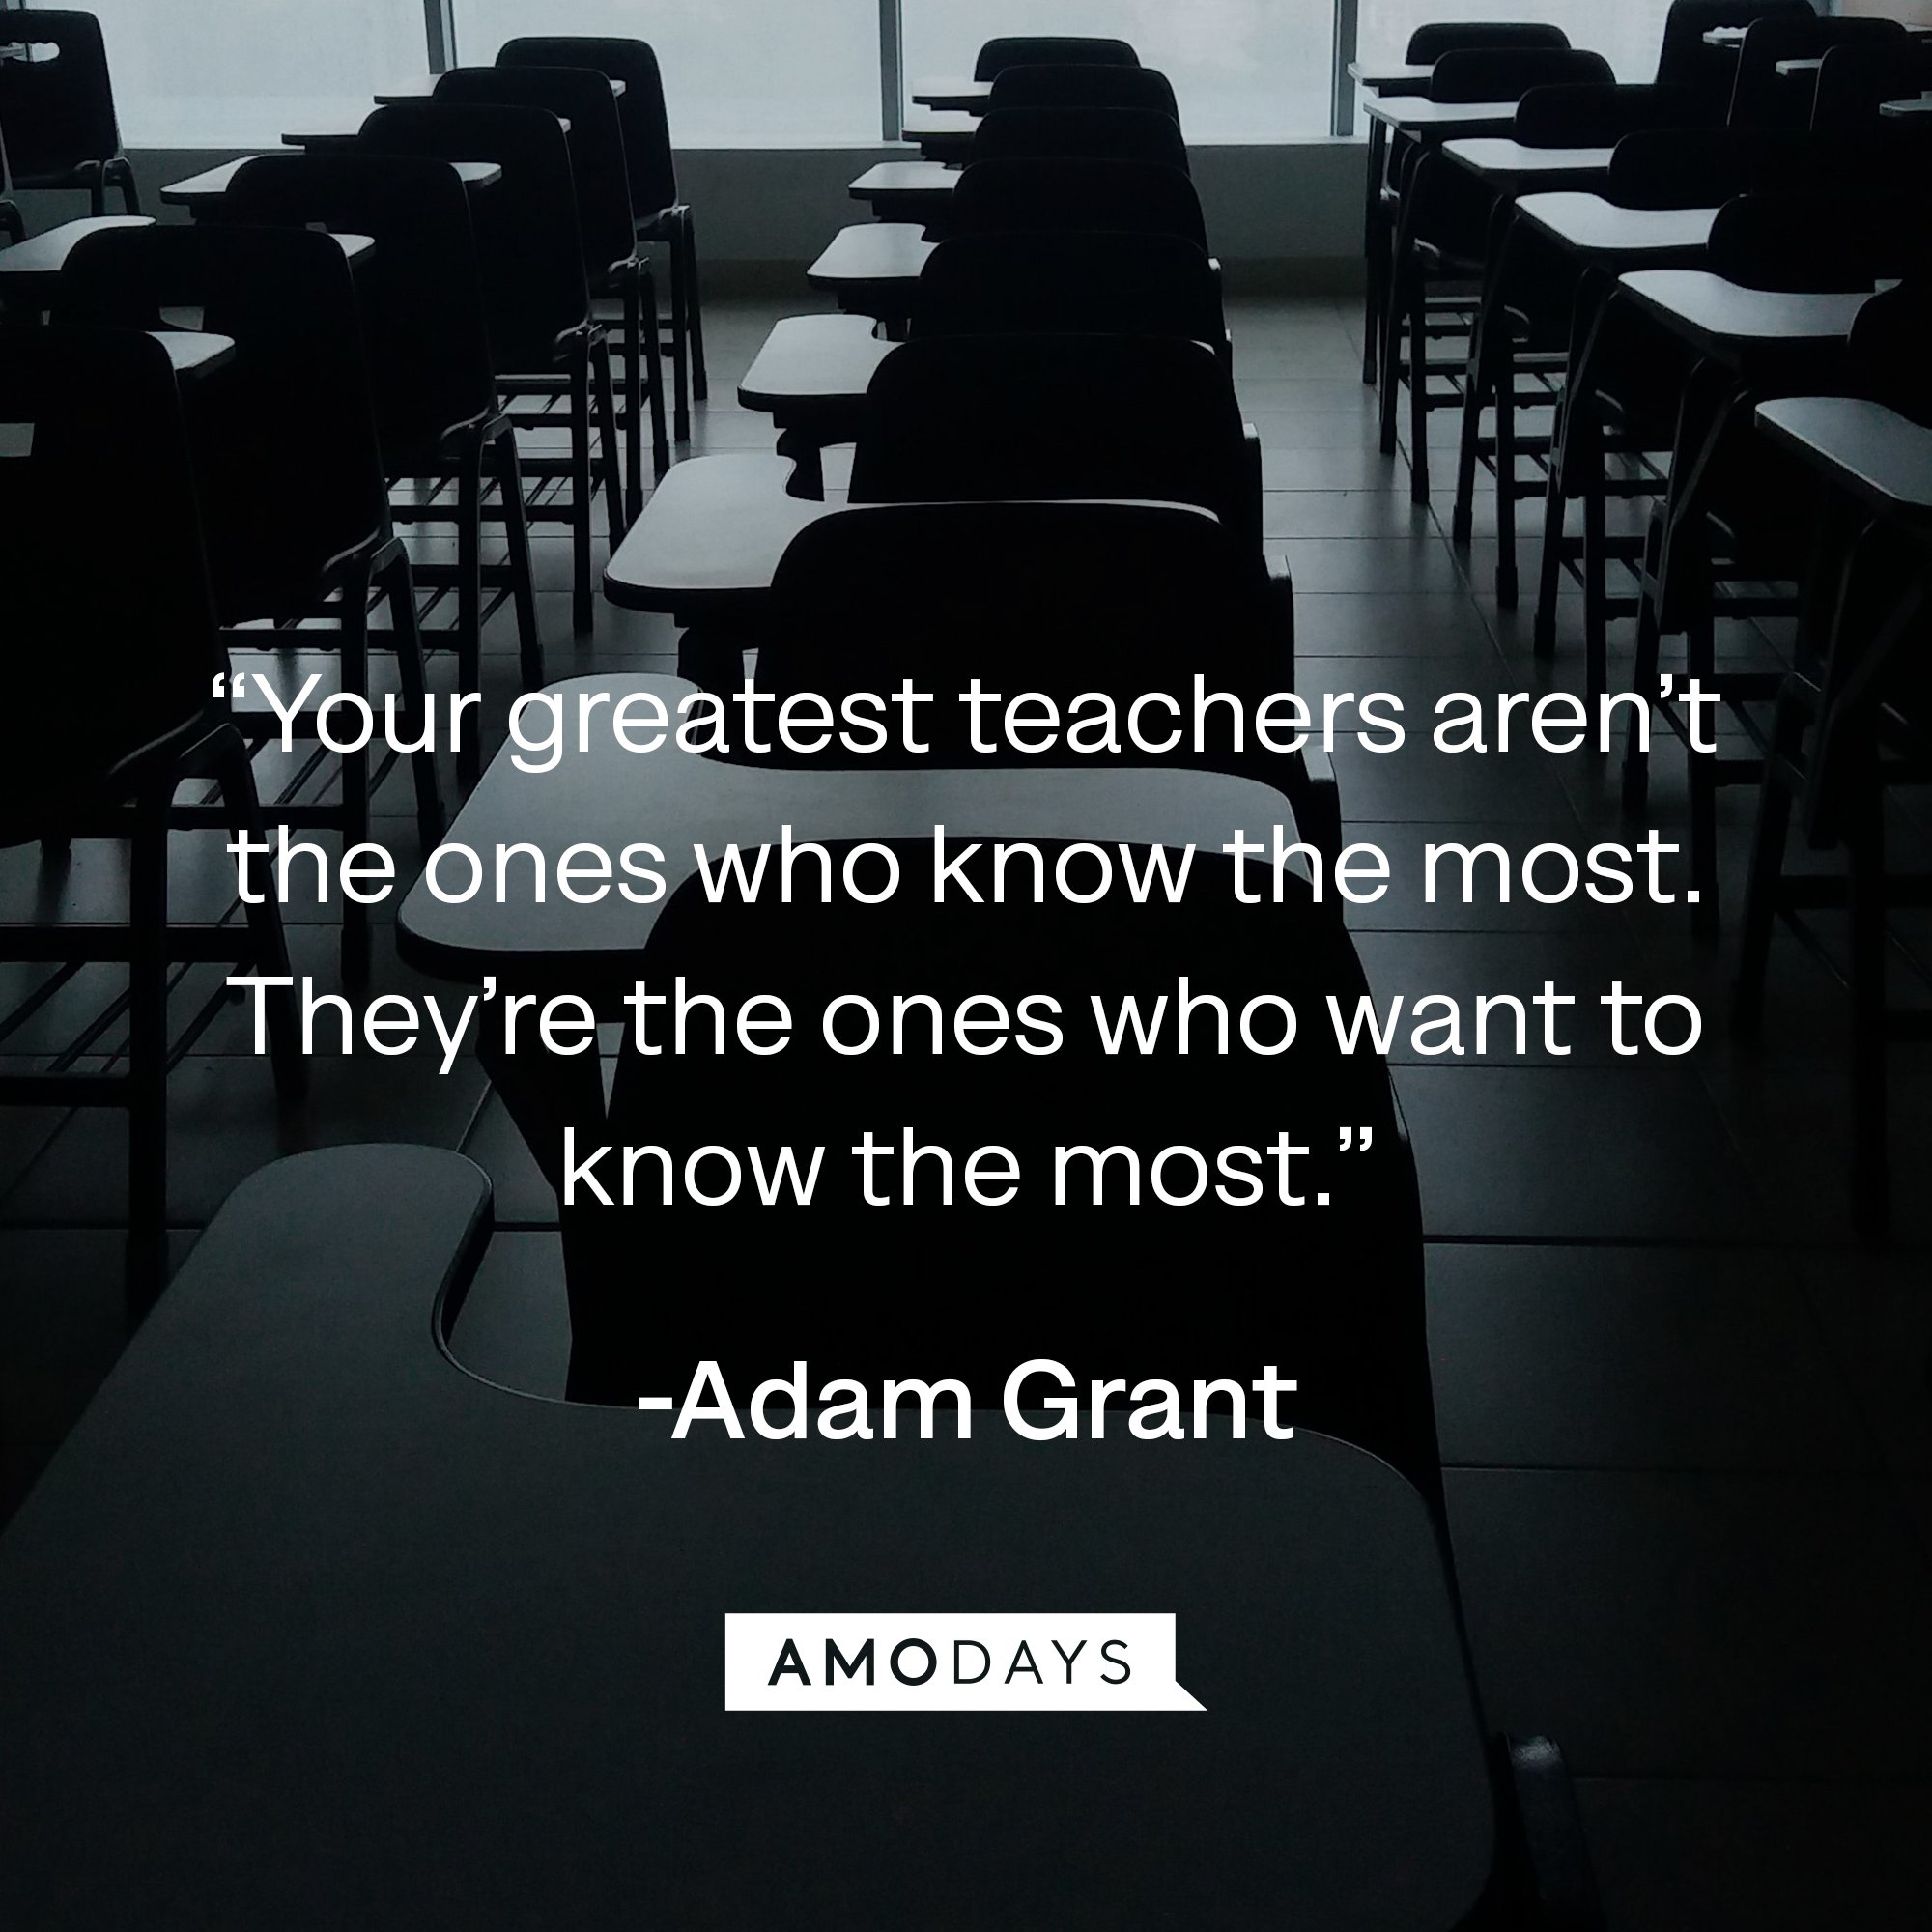 Adam Grant 's quote: “Your greatest teachers aren’t the ones who know the most. They’re the ones who want to know the most.” | Image: AmoDays  